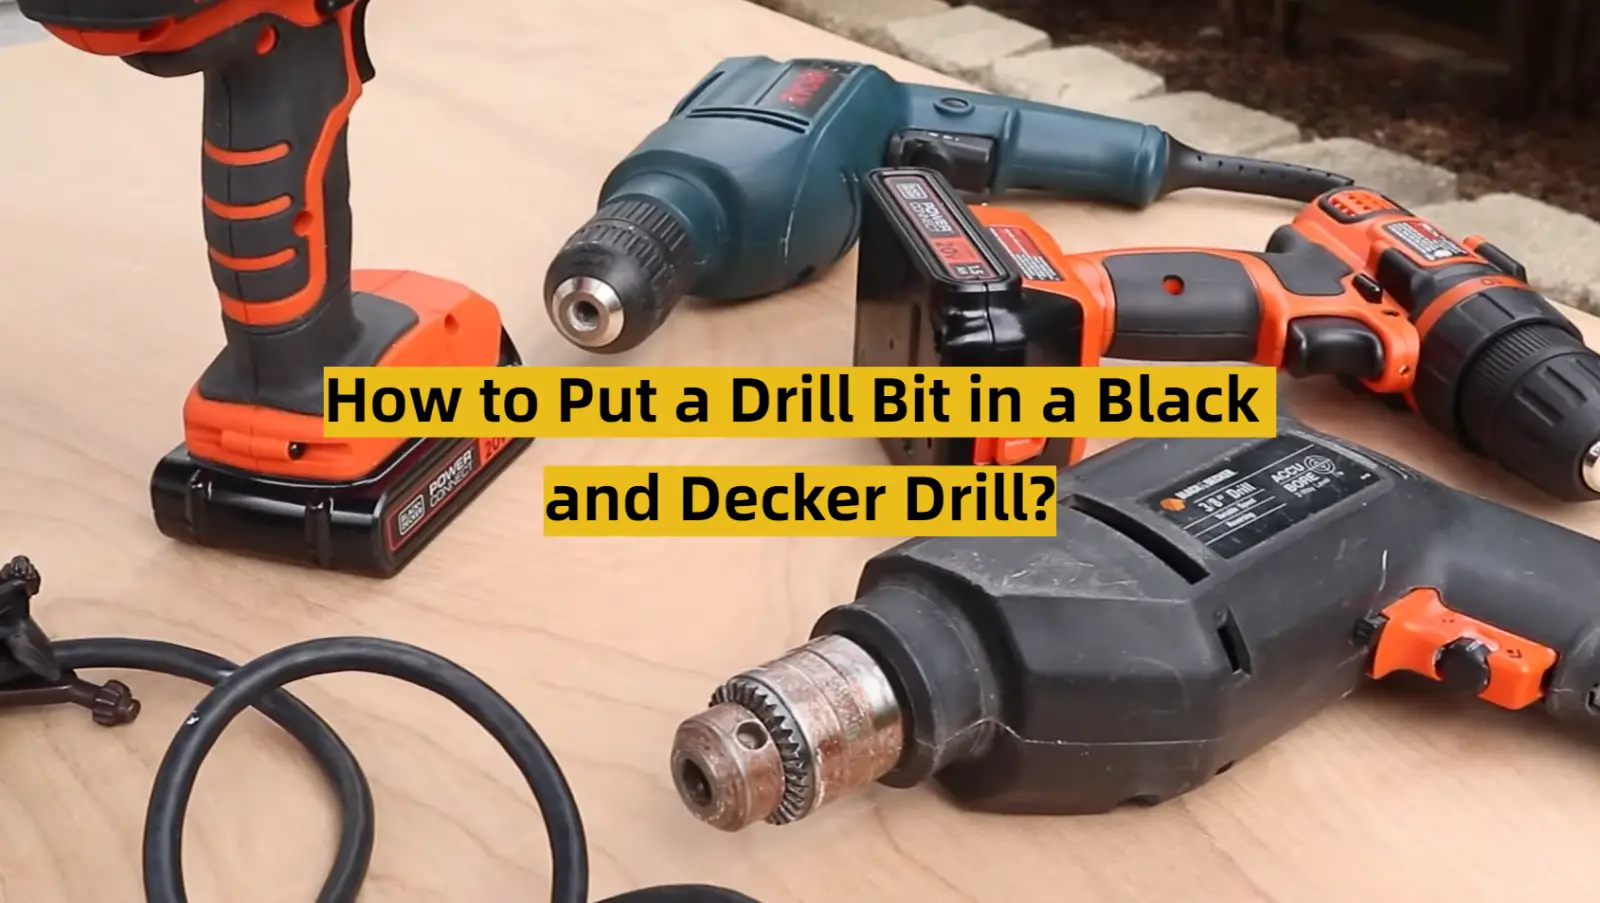 How to Put a Drill Bit in a Black and Decker Drill?